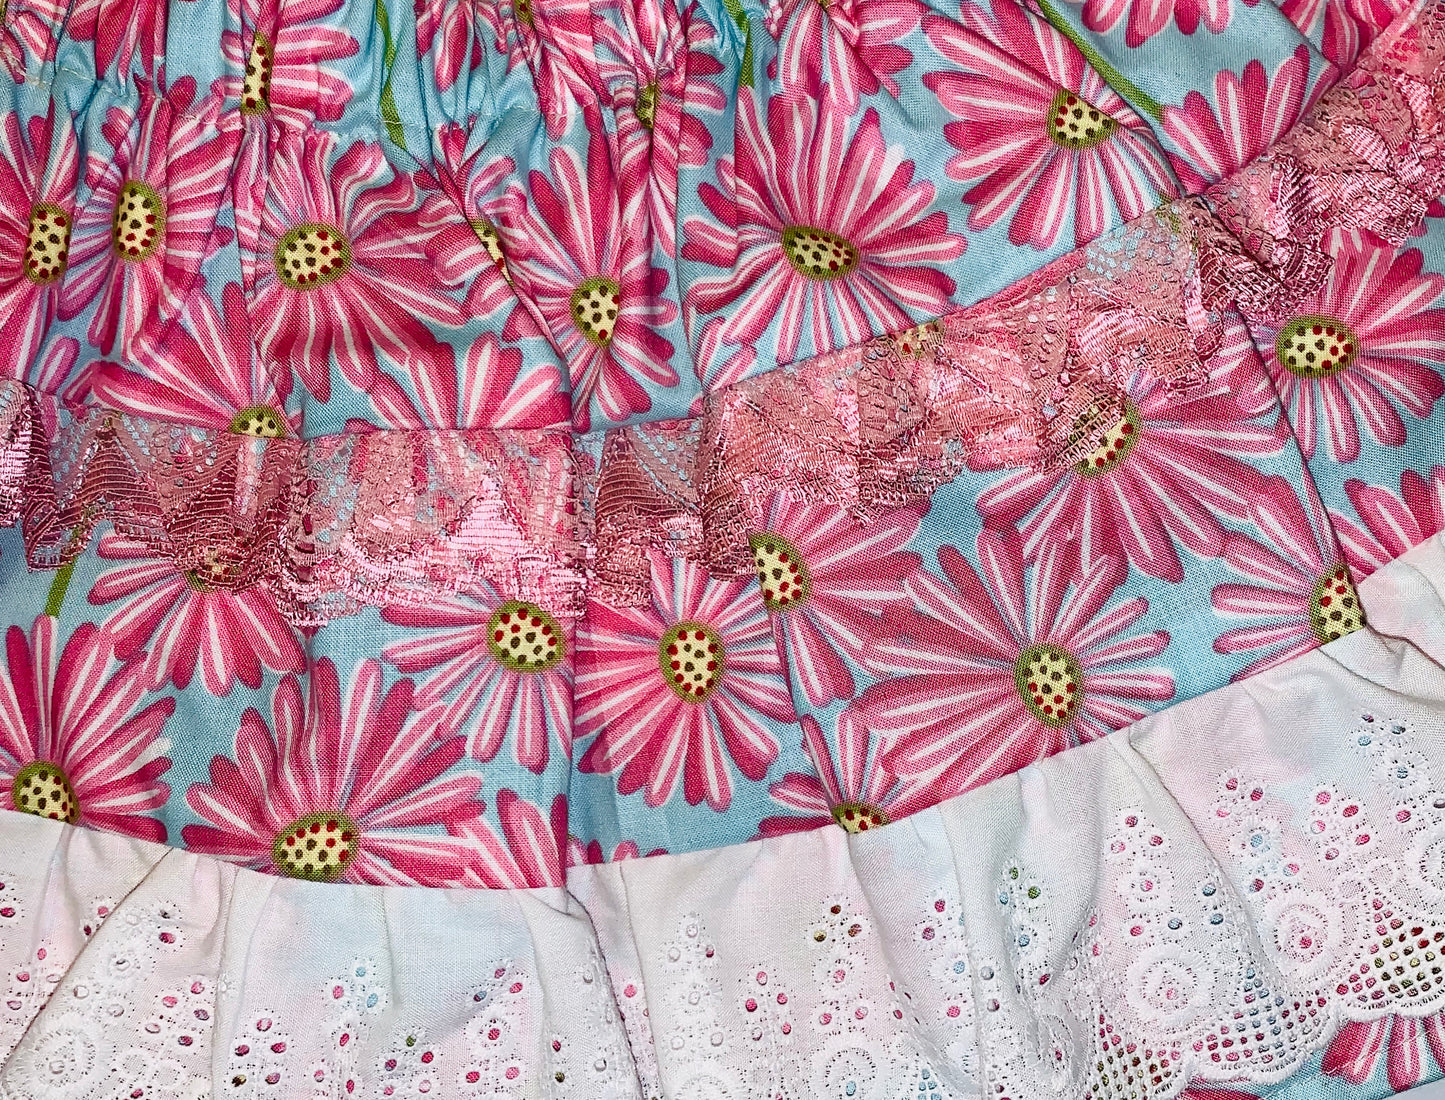 2 Piece Set - Skirt & Slip Ons - Pink Daisies on Blue